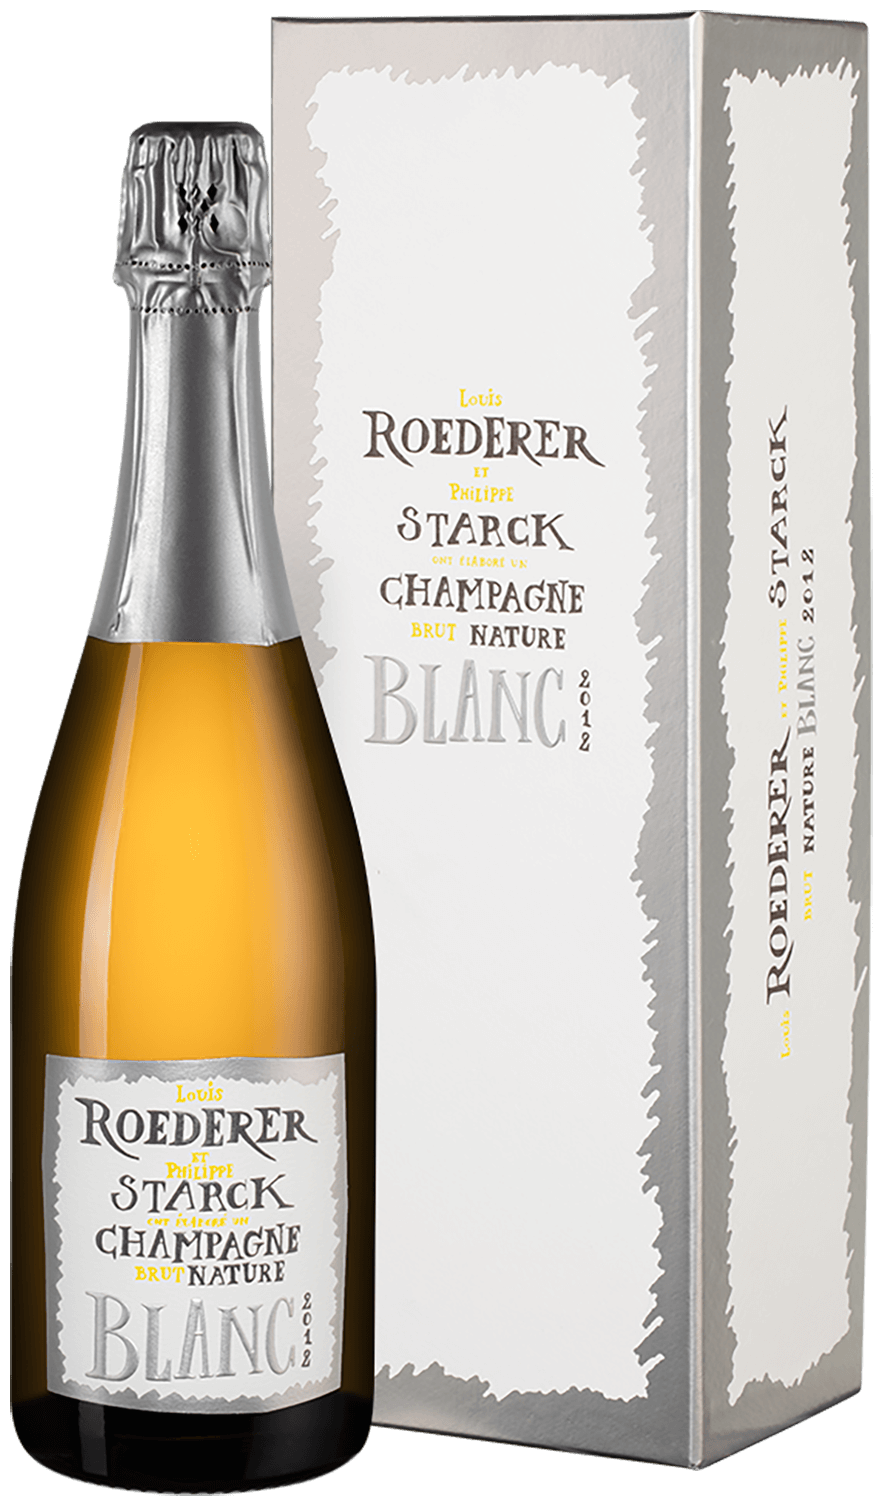 Brut Nature Champagne AOC Louis Roederer (gift box) duval leroy femme de champagne brut nature champagne aoc